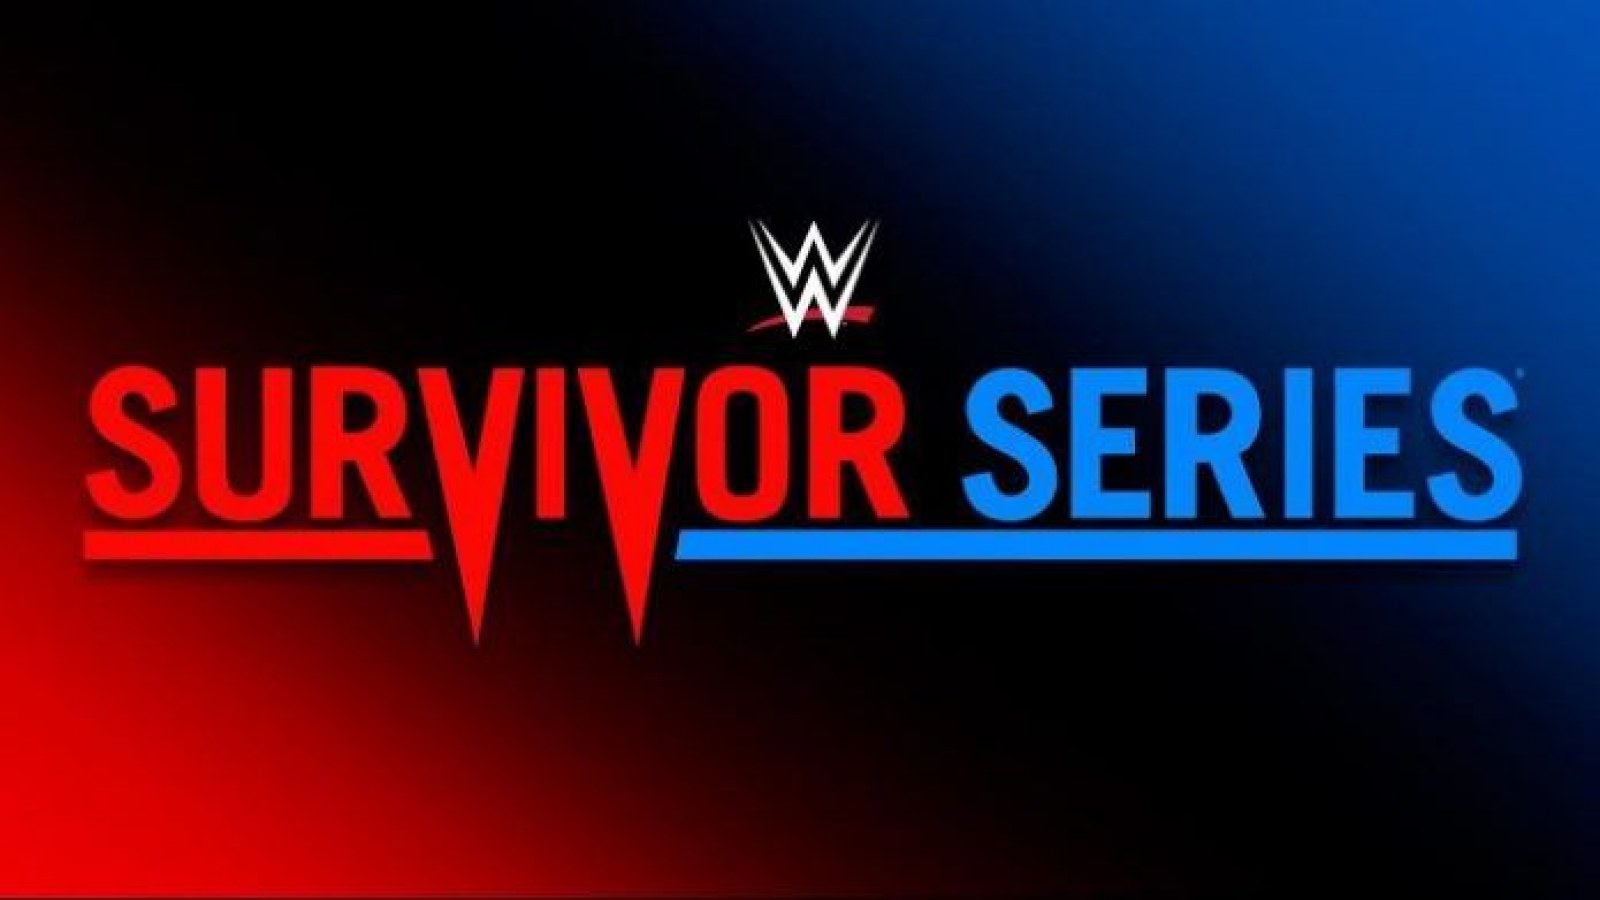 WWE Survivor Series 2018: Start Time and How to Watch Online